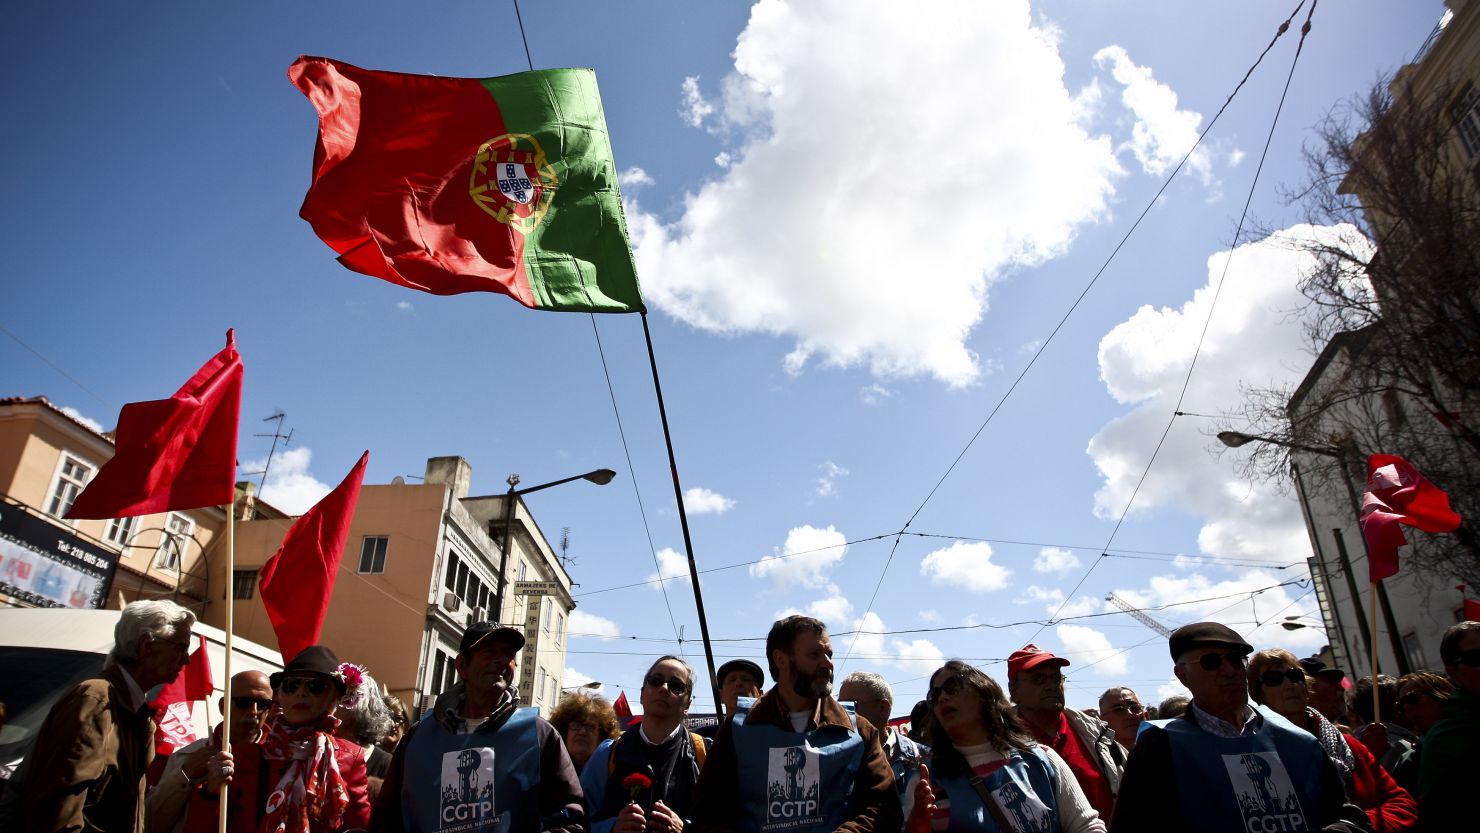 The Portuguese government has decided to cancel four public holidays in an attempt to boost the economy.